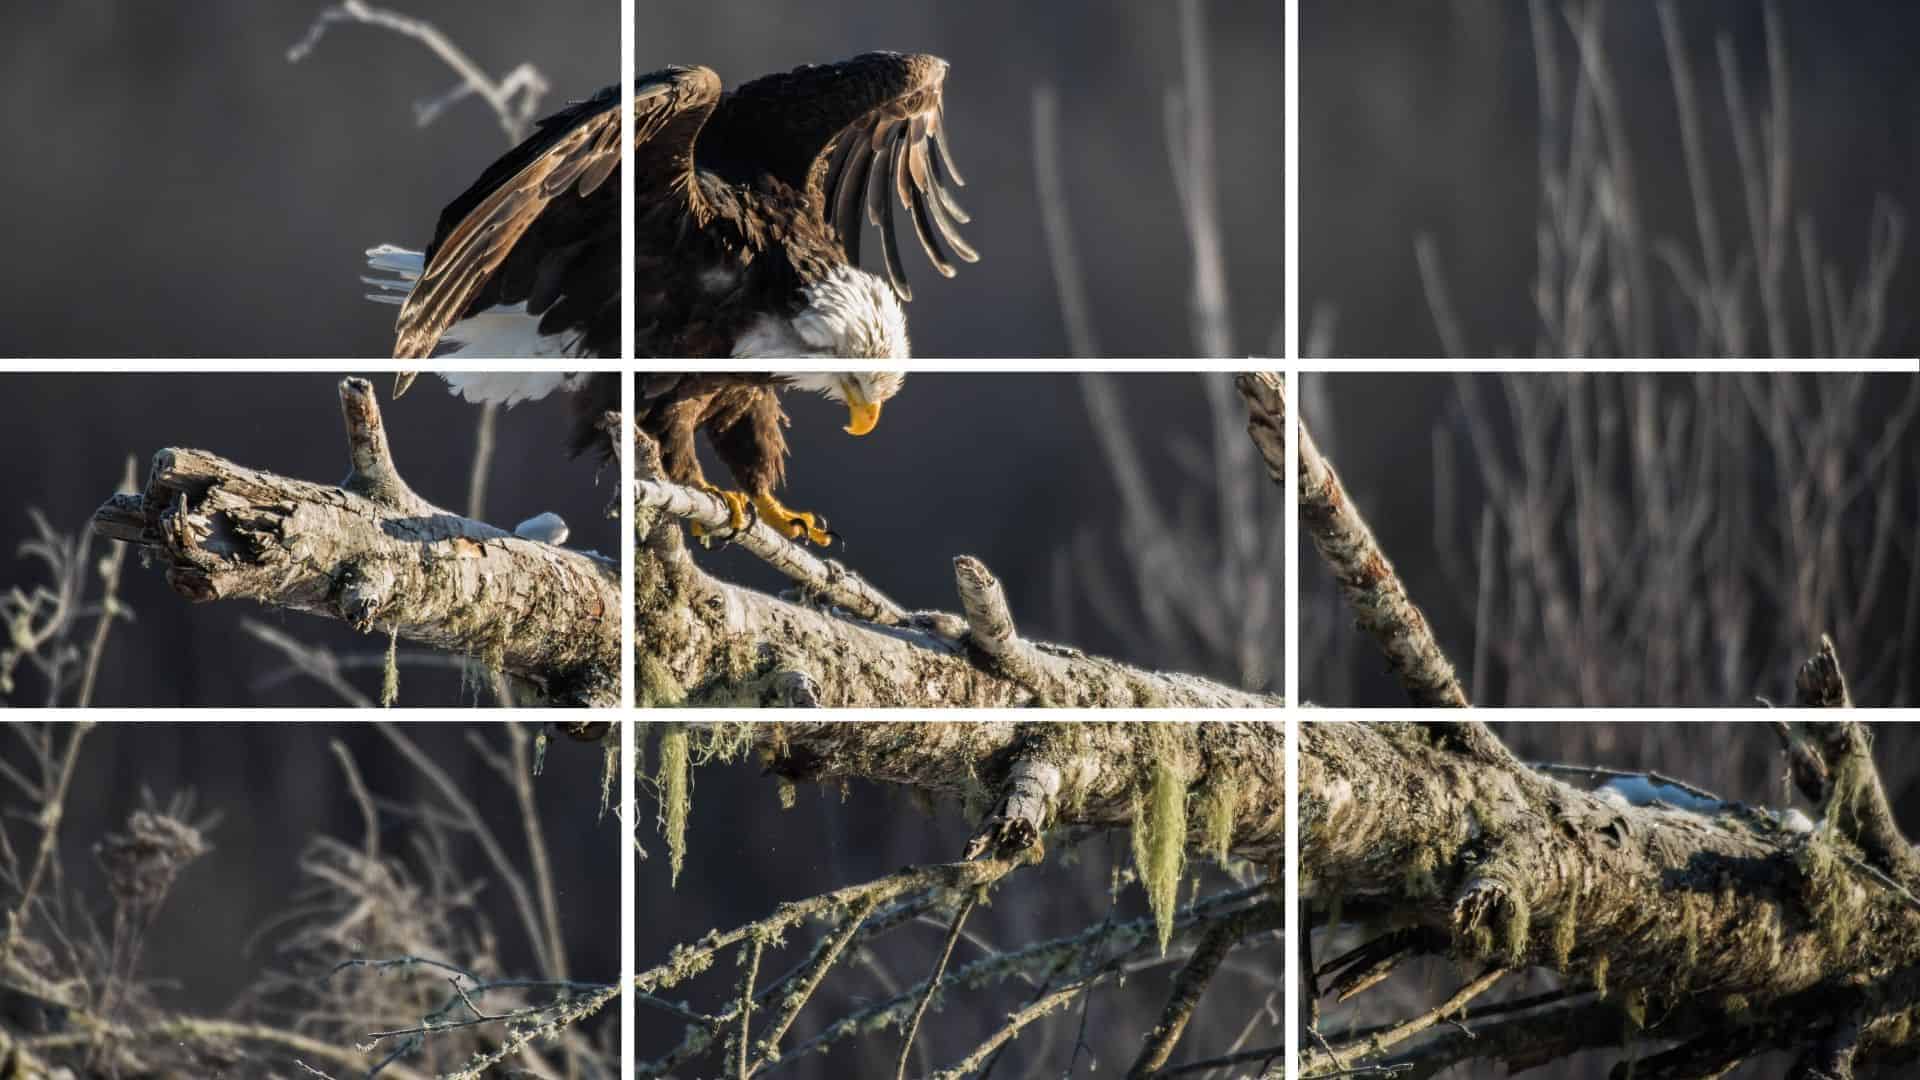 Rule of thirds grid to place the eagle in the upper left corner of the photo.